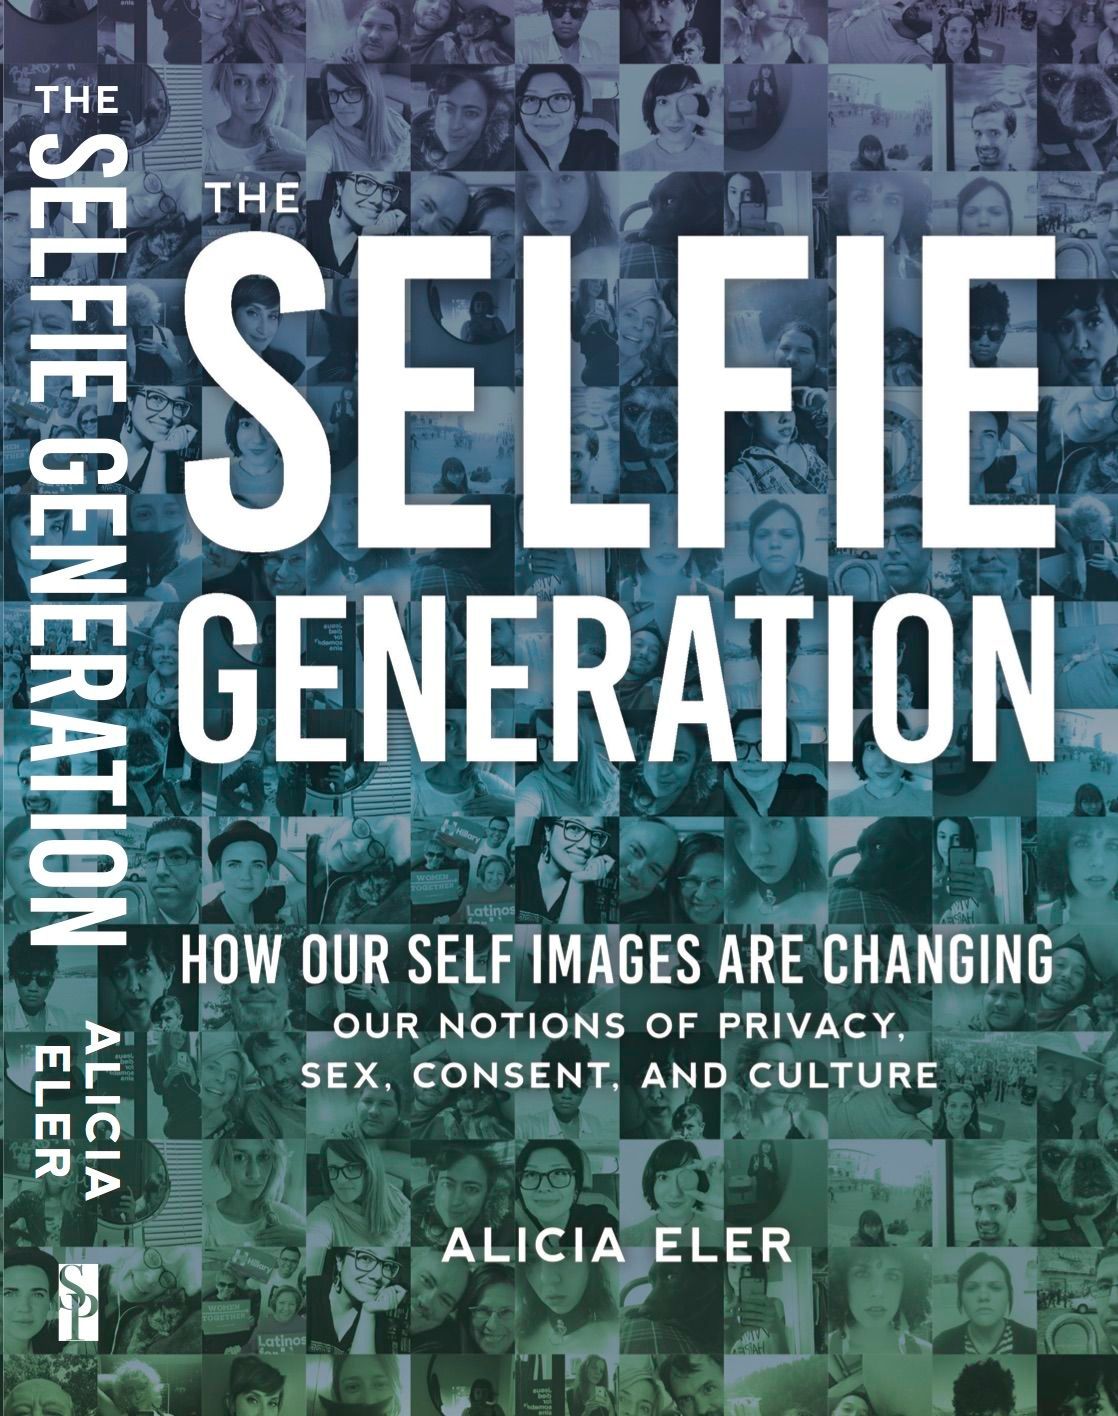 Let Me Take a Selfie: Possibility, Performativity, and Politics in Alicia Eler’s “The Selfie Generation”